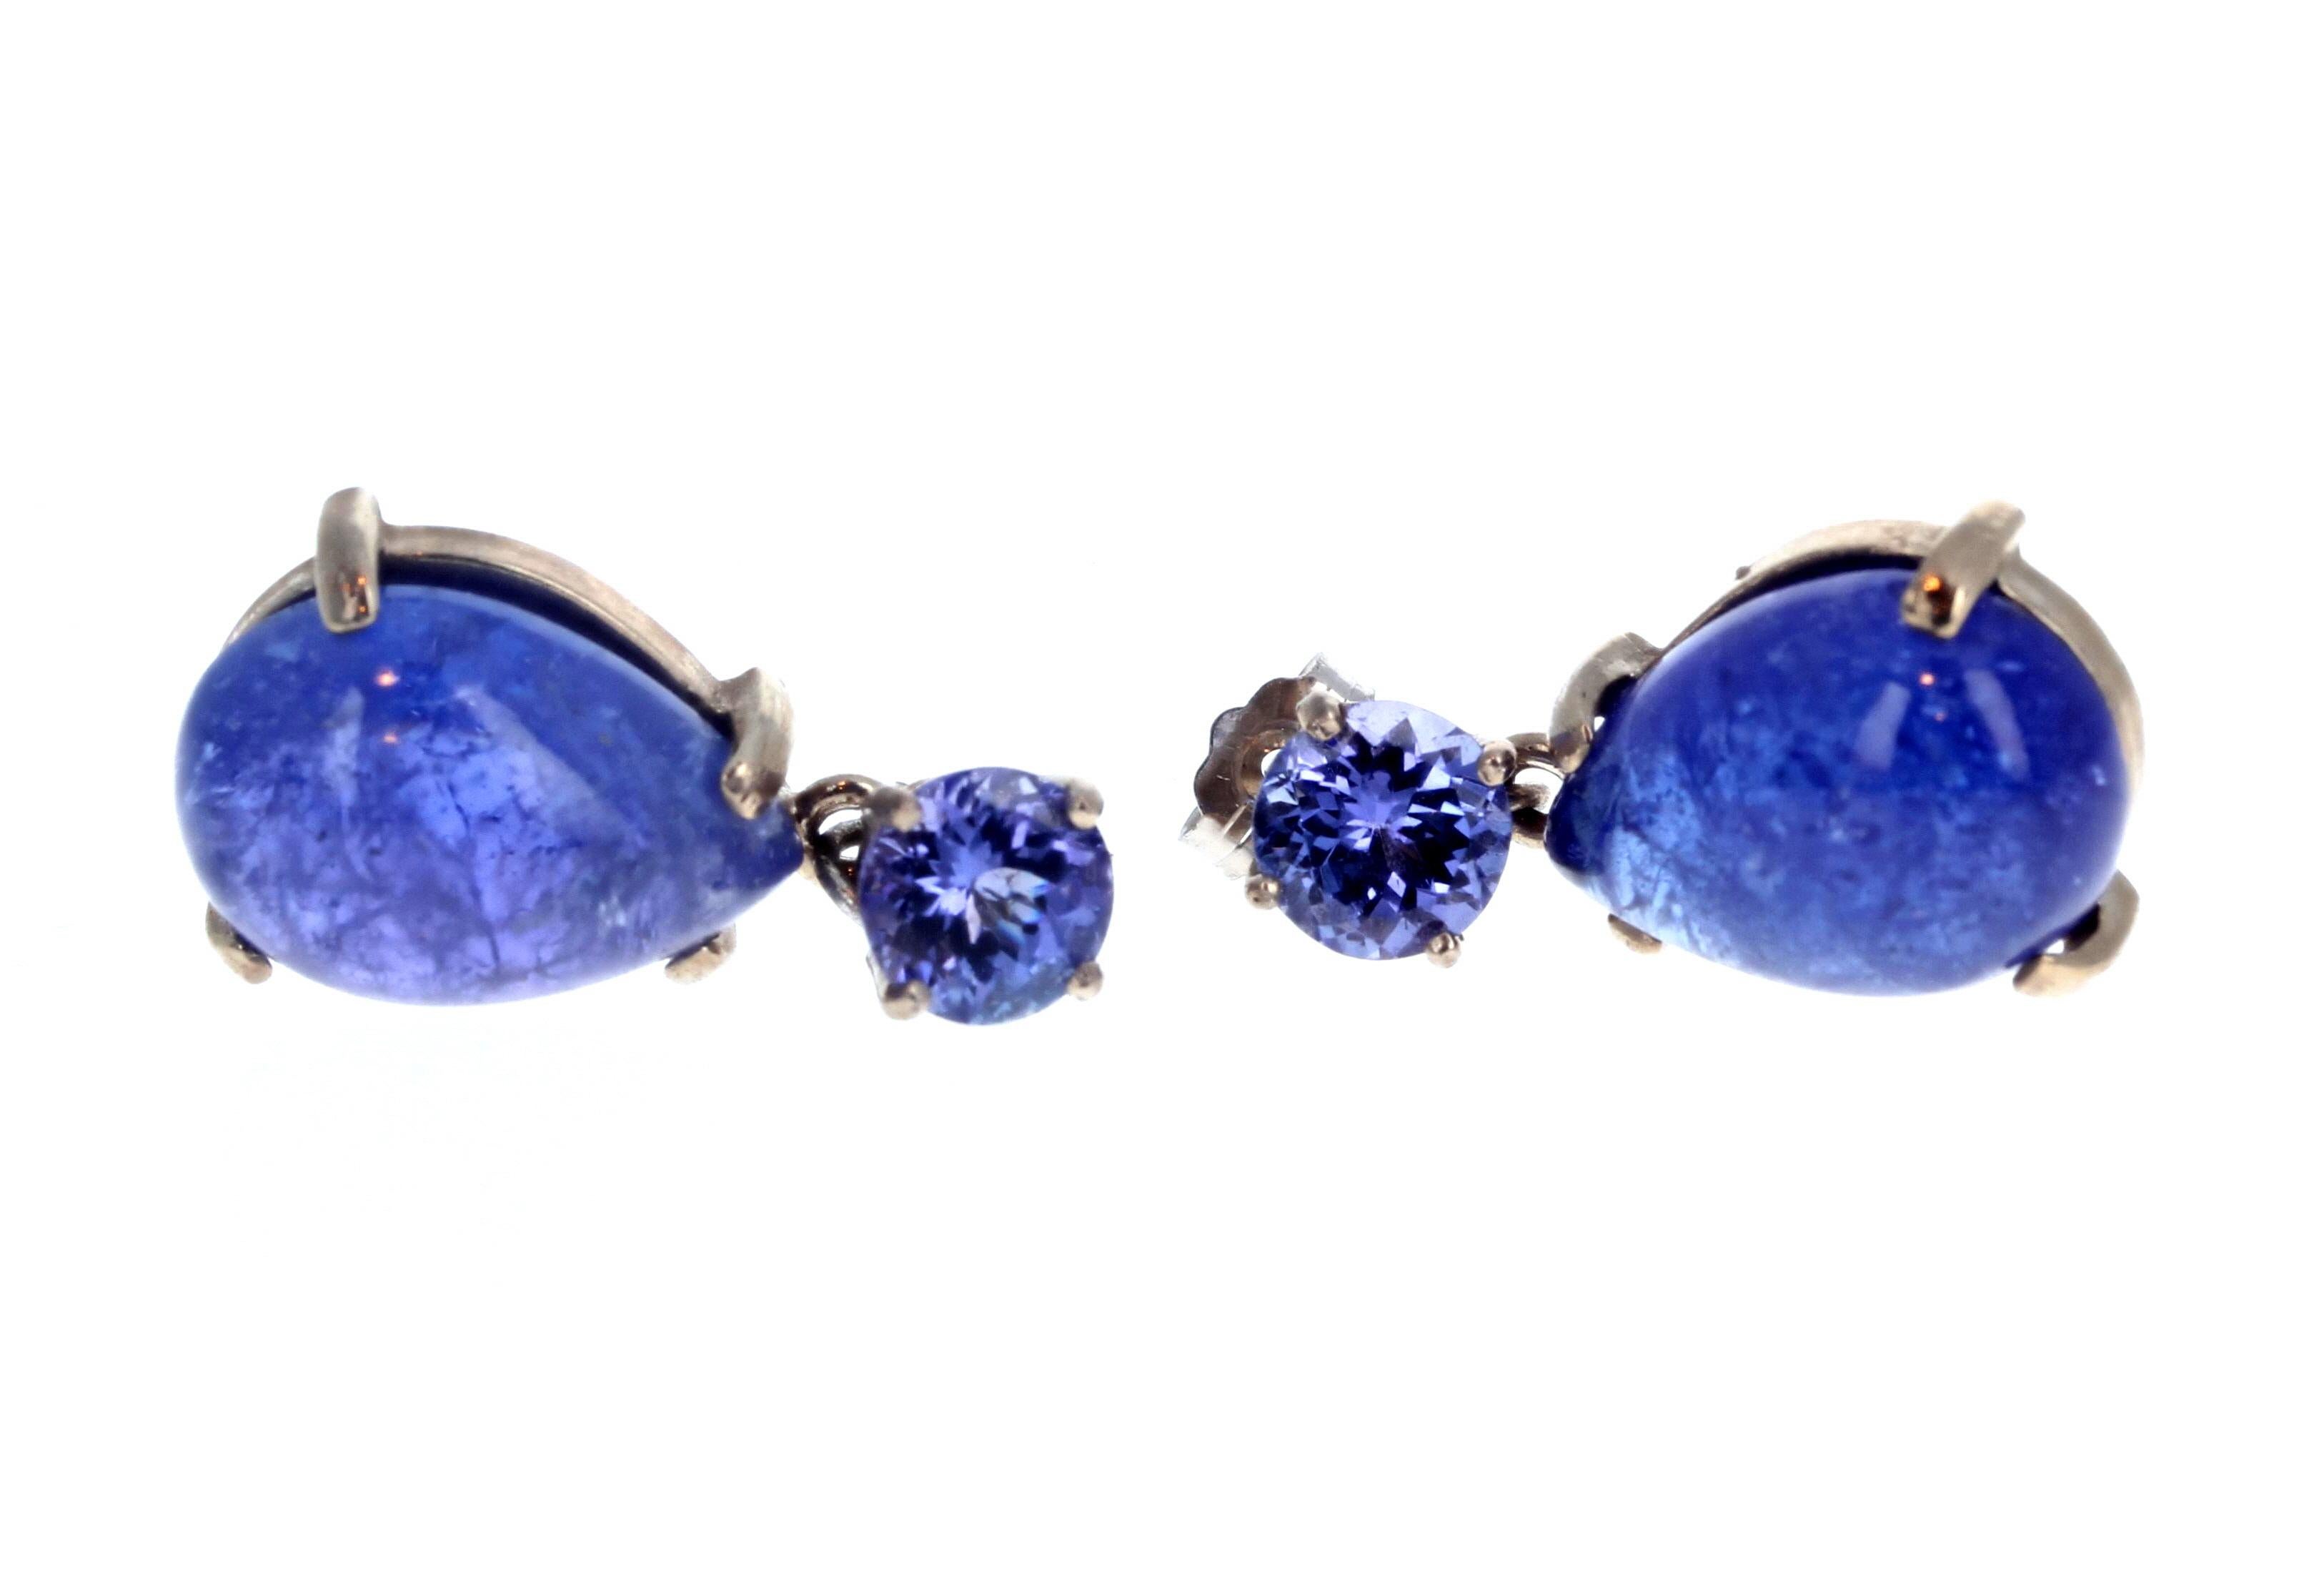 Mixed Cut AJD Gorgeous Natural Blue Tanzanite Gems & Cabochons Stud Earrings For Sale